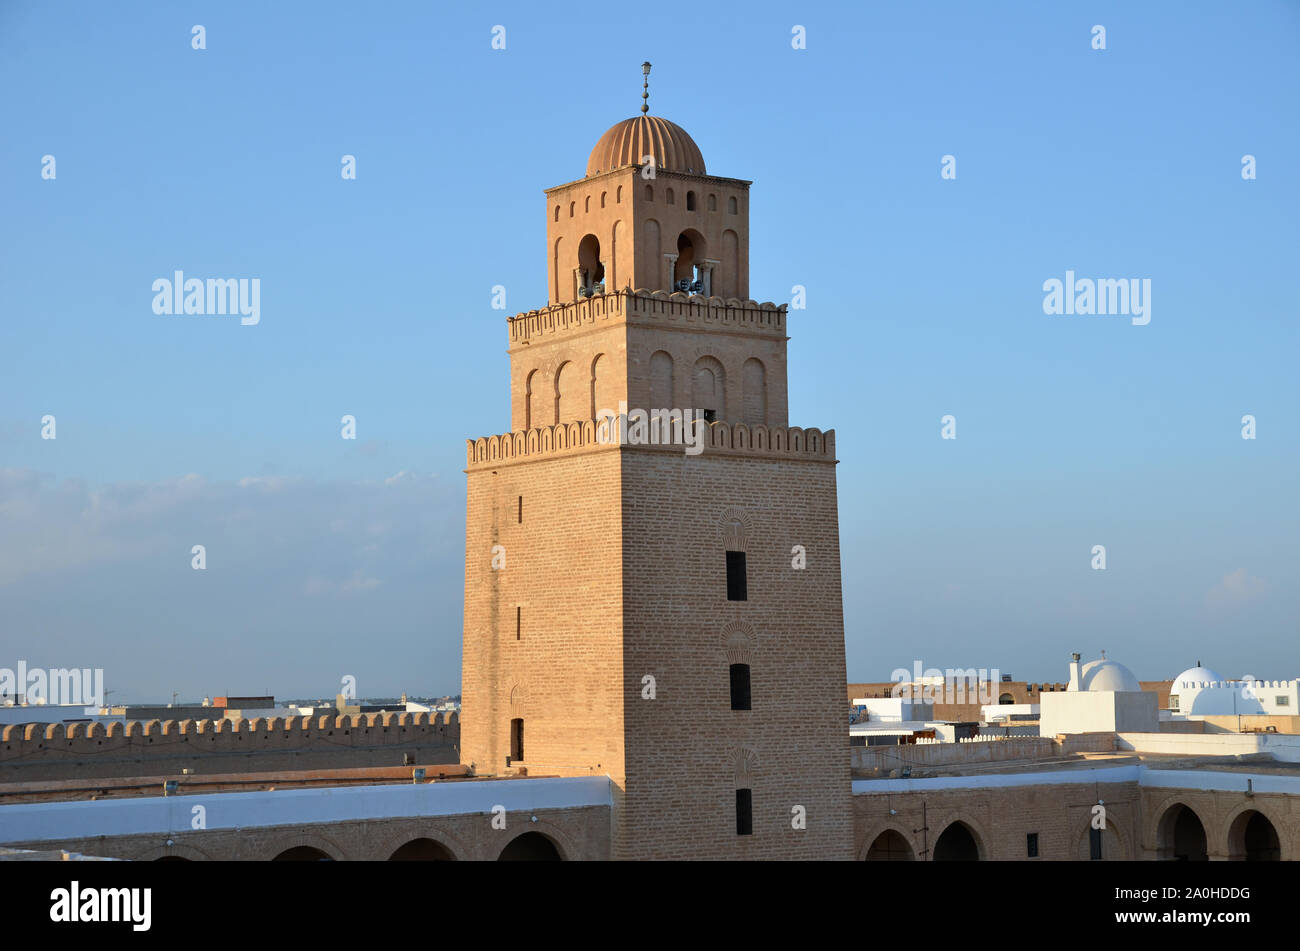 Minaret in the mosque of Uqba Stock Photo